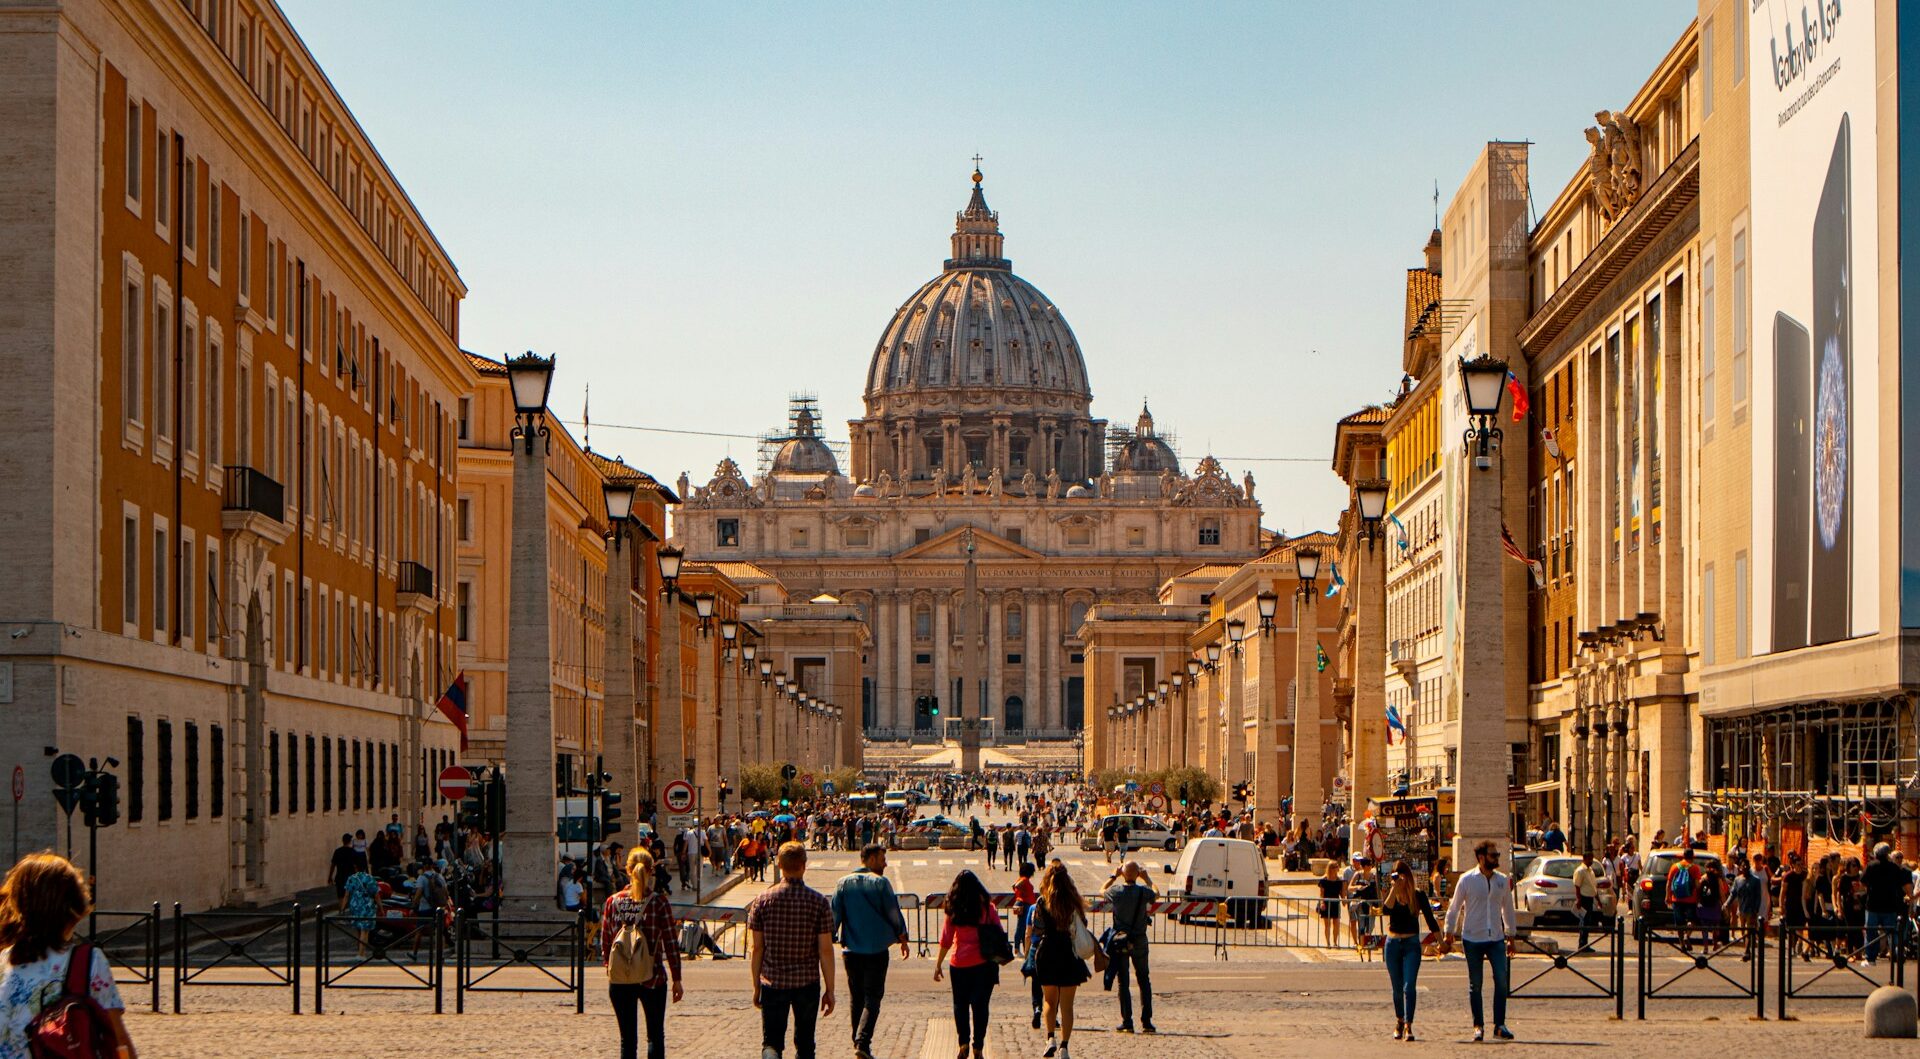 Photo looking down a road towards St Peter's Basilica and the Vatican City in Rome